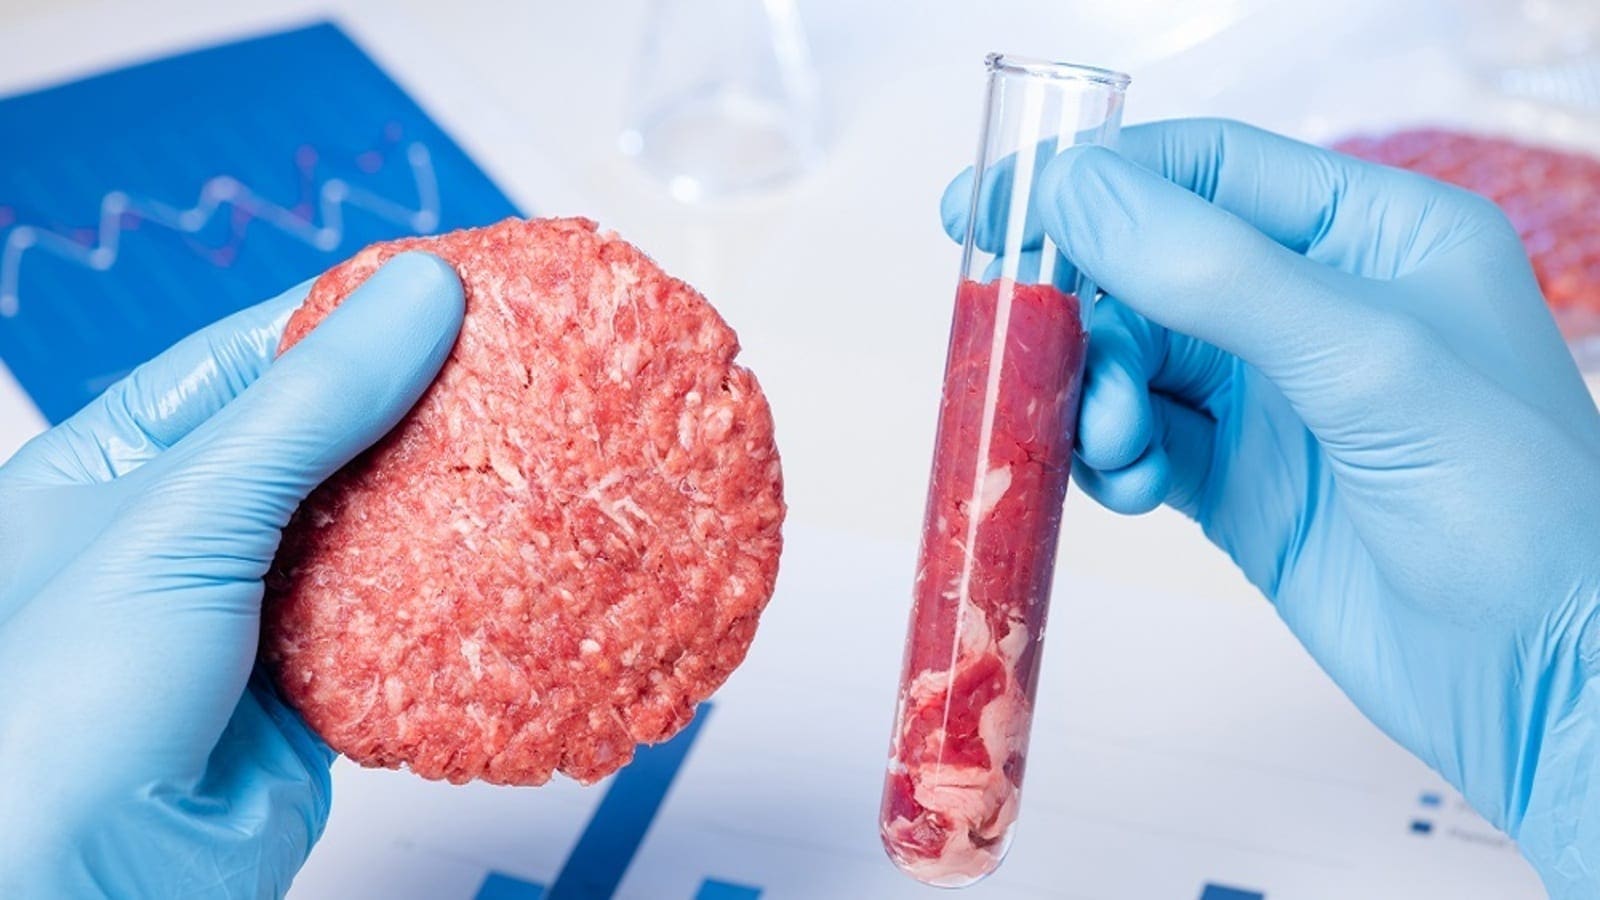 University of California receives US$3.55m grant to investigate long-term viability of cell-cultured meat